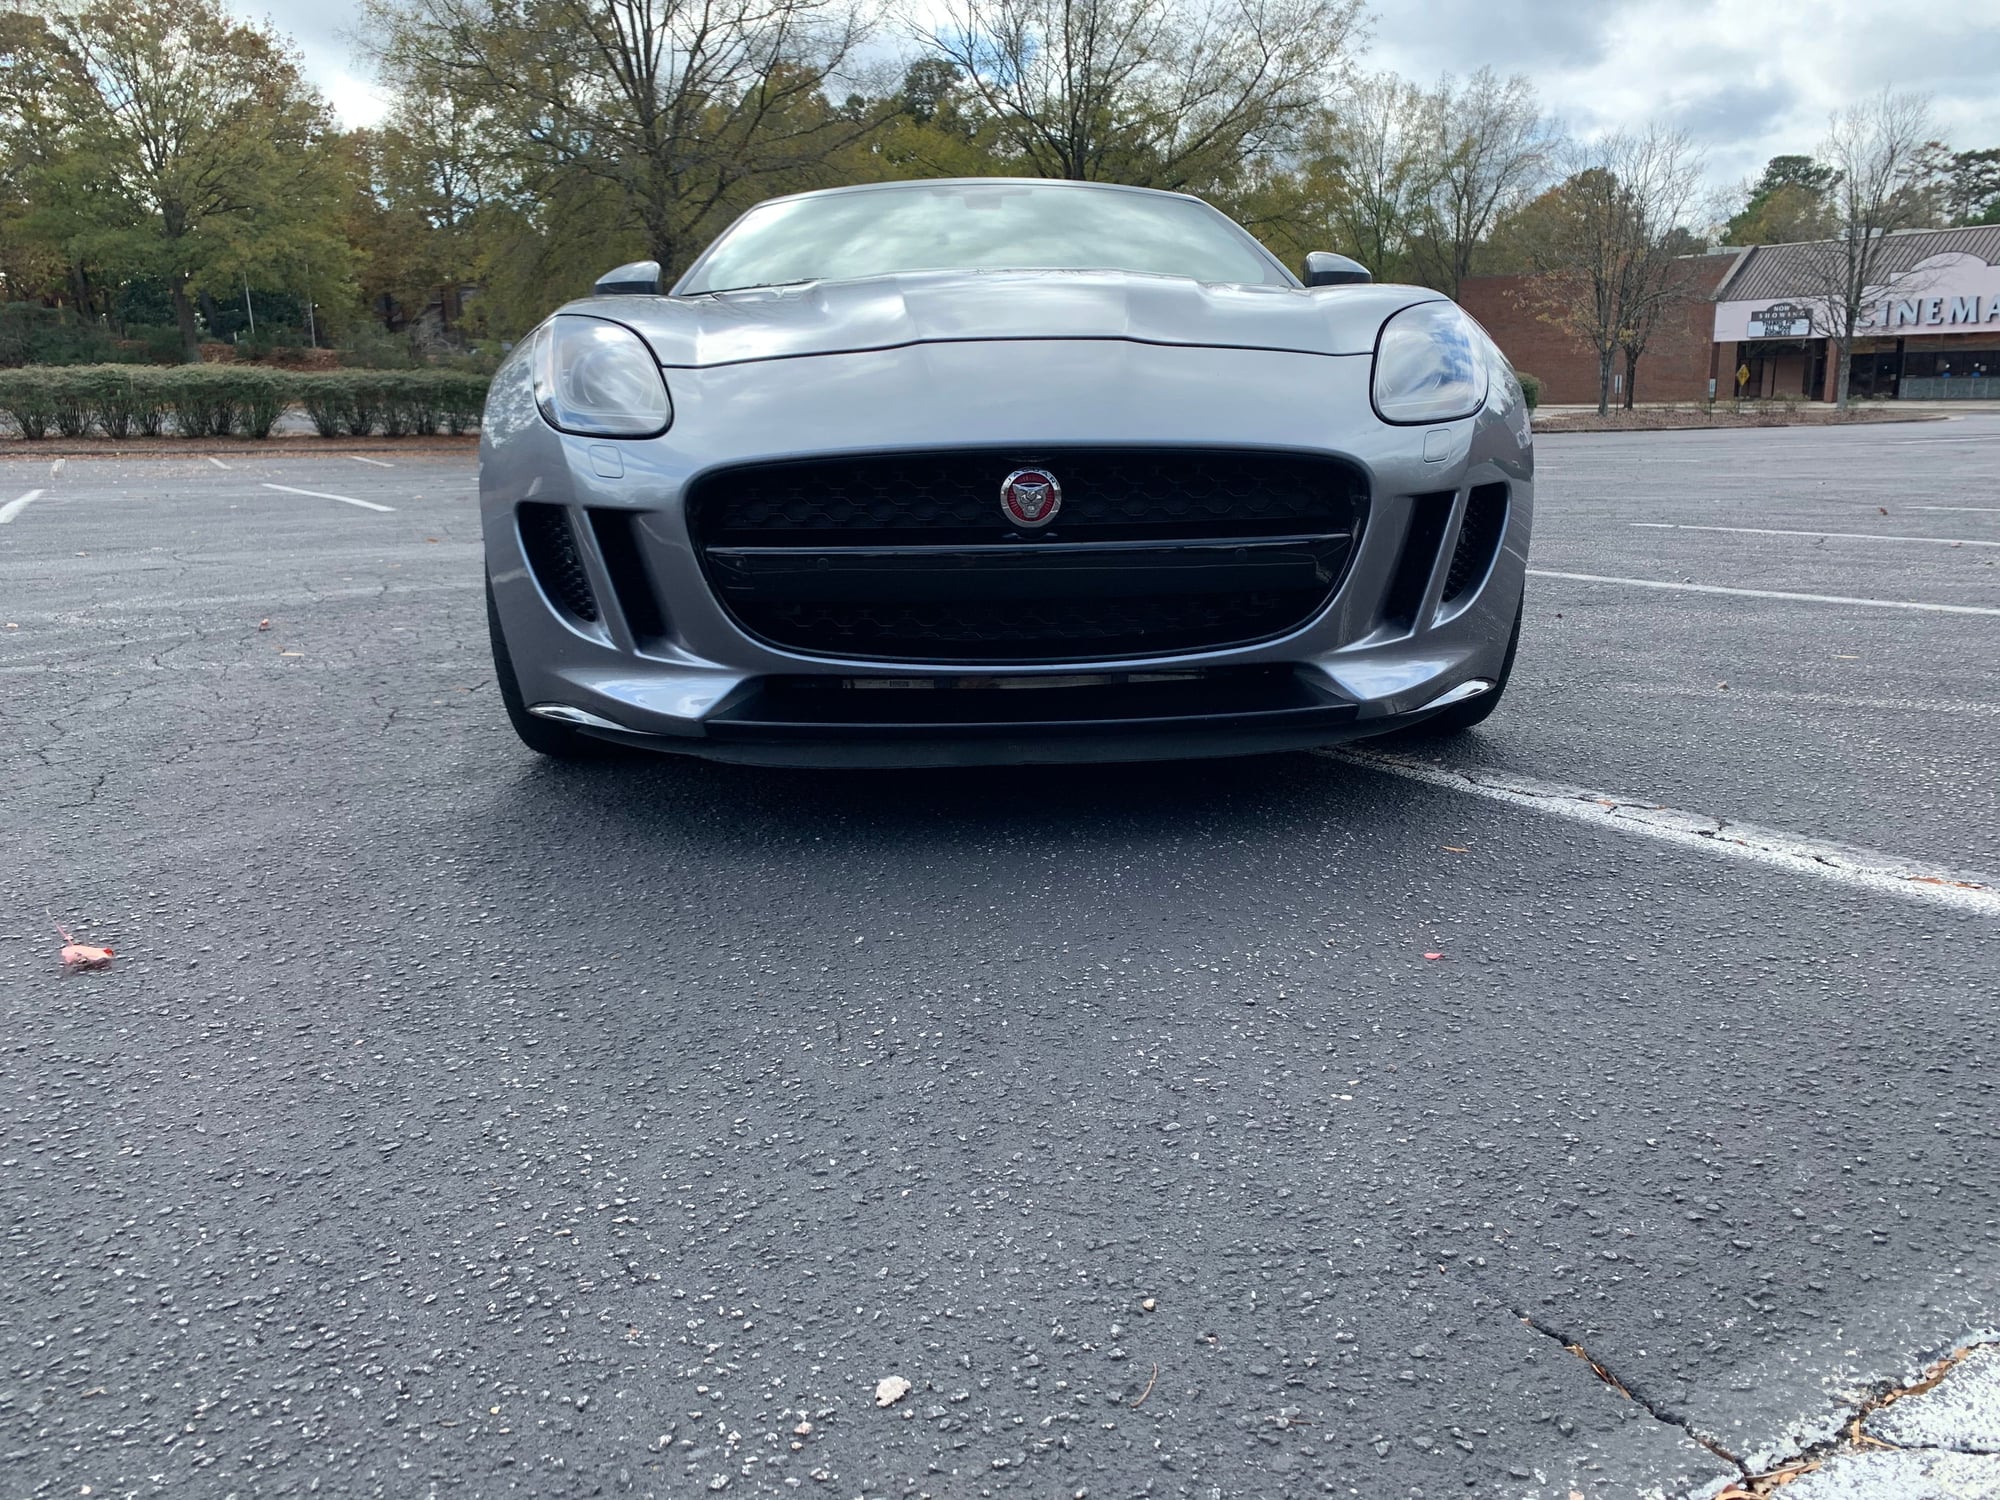 2015 Jaguar F-Type - 2015 F Type V8s 645 HP - Used - VIN sajwa6gl6fmk19011 - 32,000 Miles - 8 cyl - 2WD - Automatic - Convertible - Gray - Raleigh, NC 27612, United States